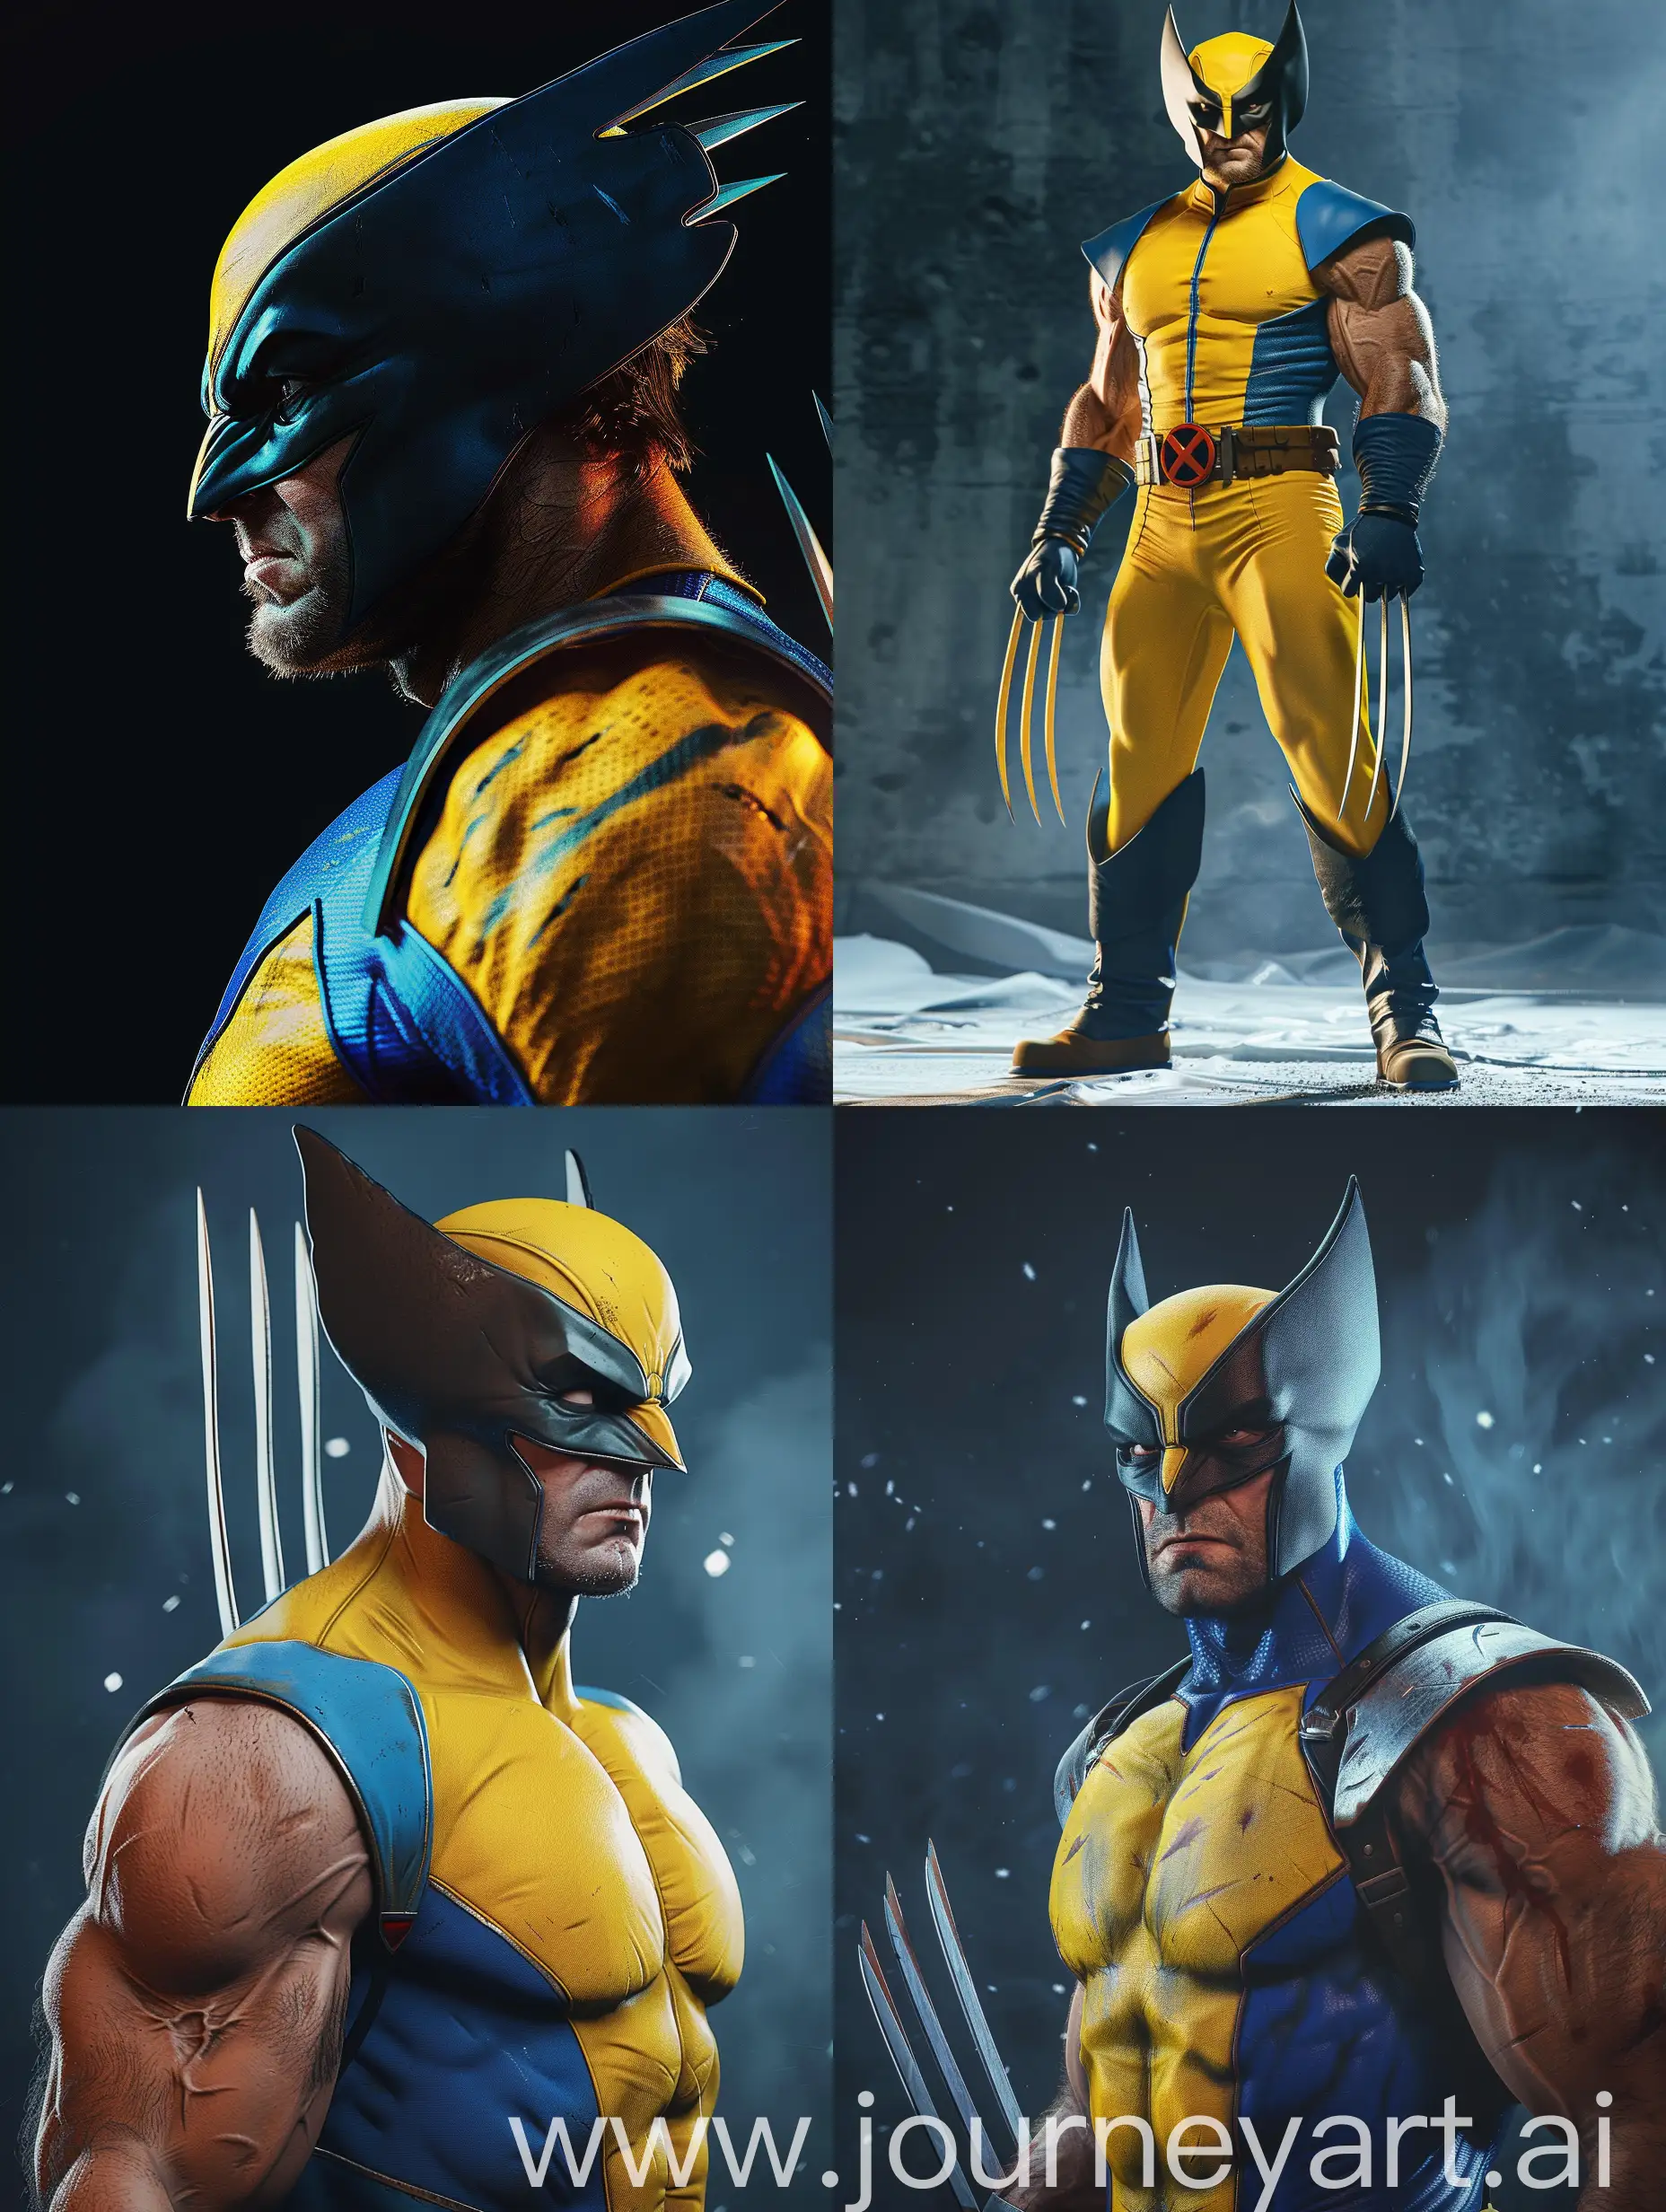 Hugh-Jackman-as-Wolverine-in-Classic-Yellow-and-Blue-Suit-Body-Forward-Ultra-Detailed-8K-Image